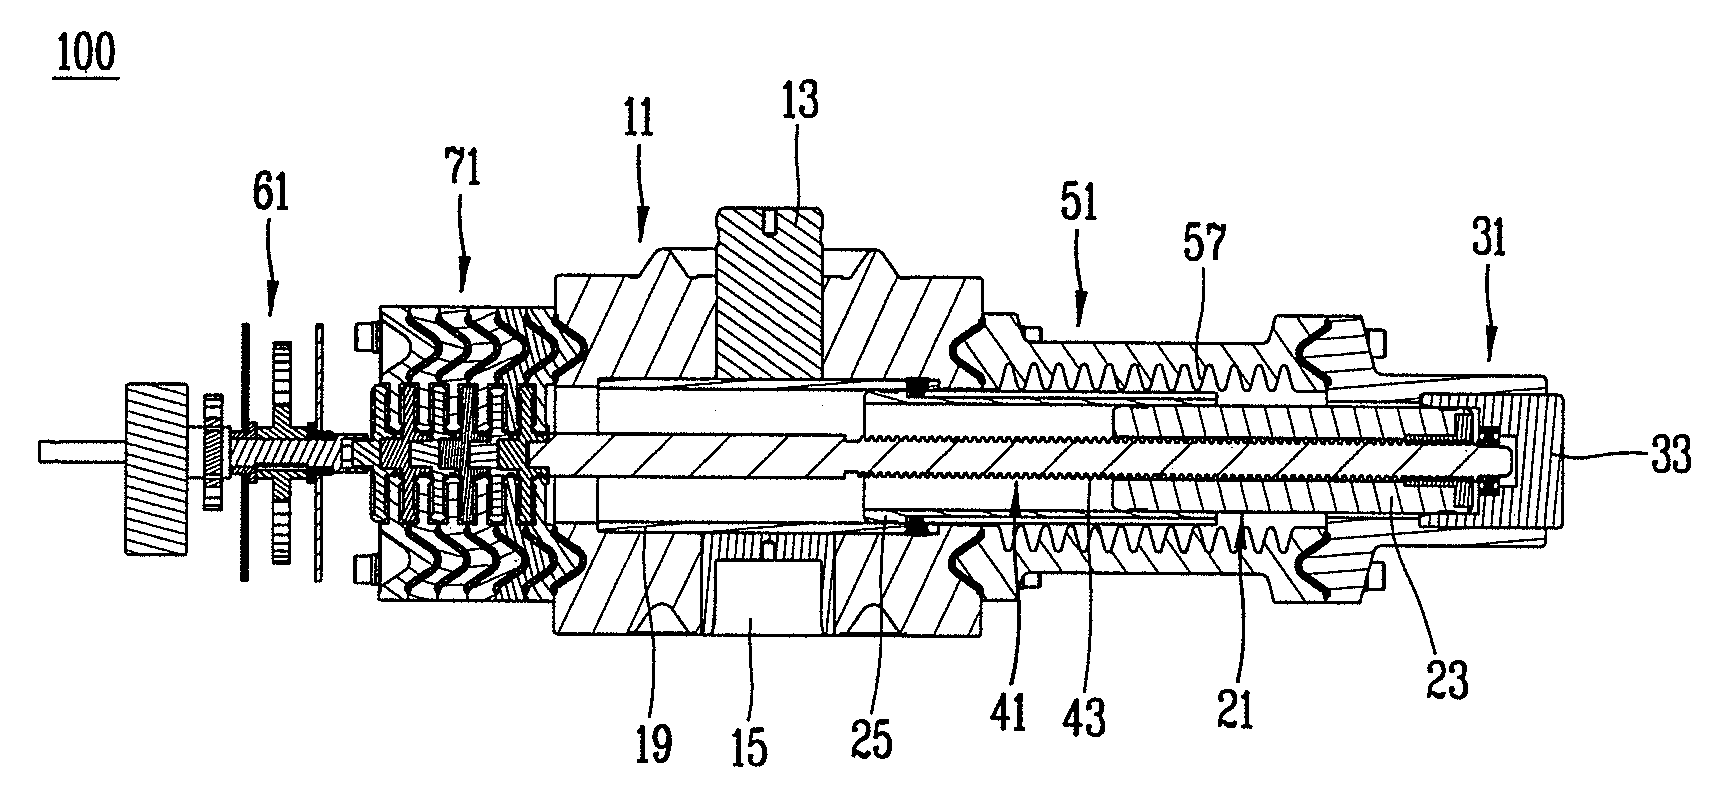 Solid insulated disconnection switch and solid insulated switchgear using the same